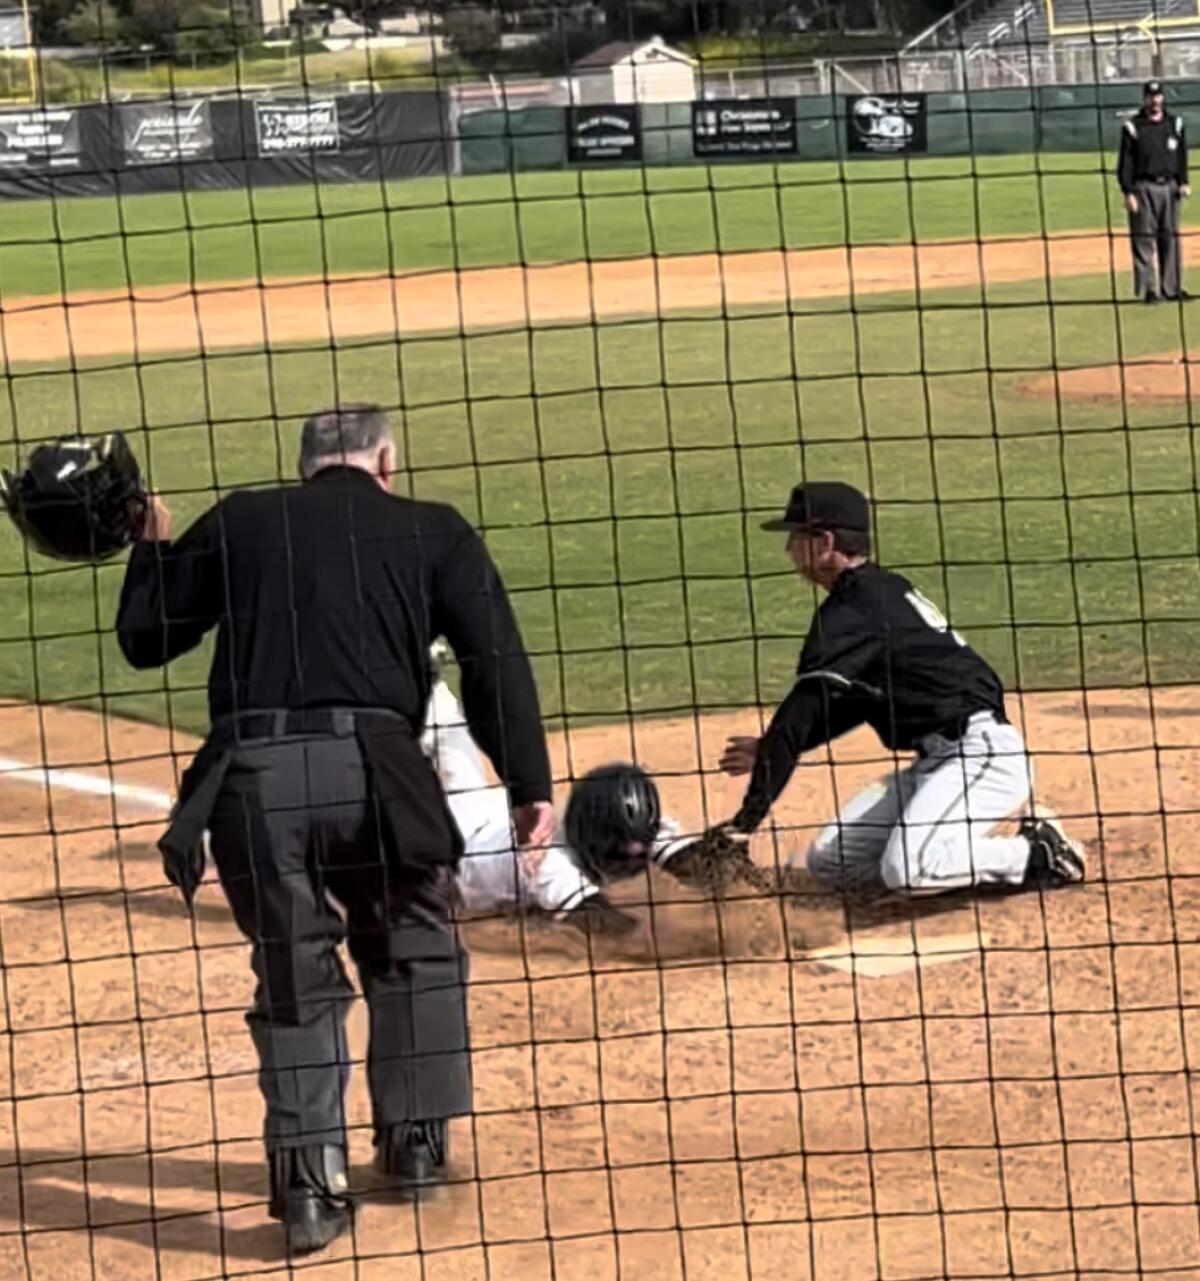 A pitcher tags out a runner at home plate in a baseball game as an umpire watches before making a call.